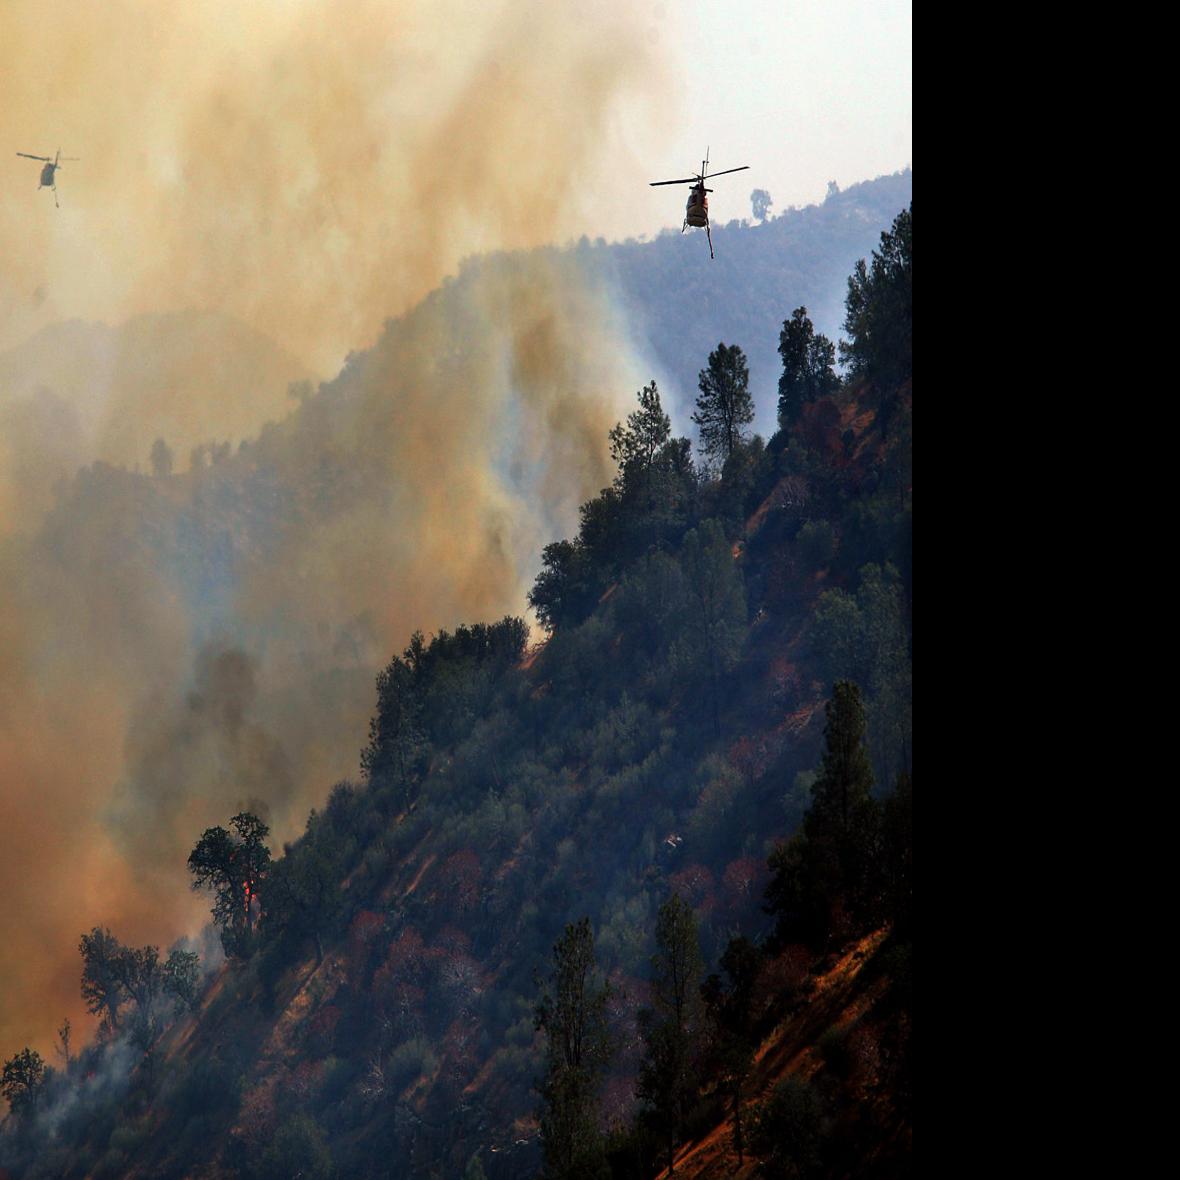 Thumb Fire grows without containment at Grand Canyon